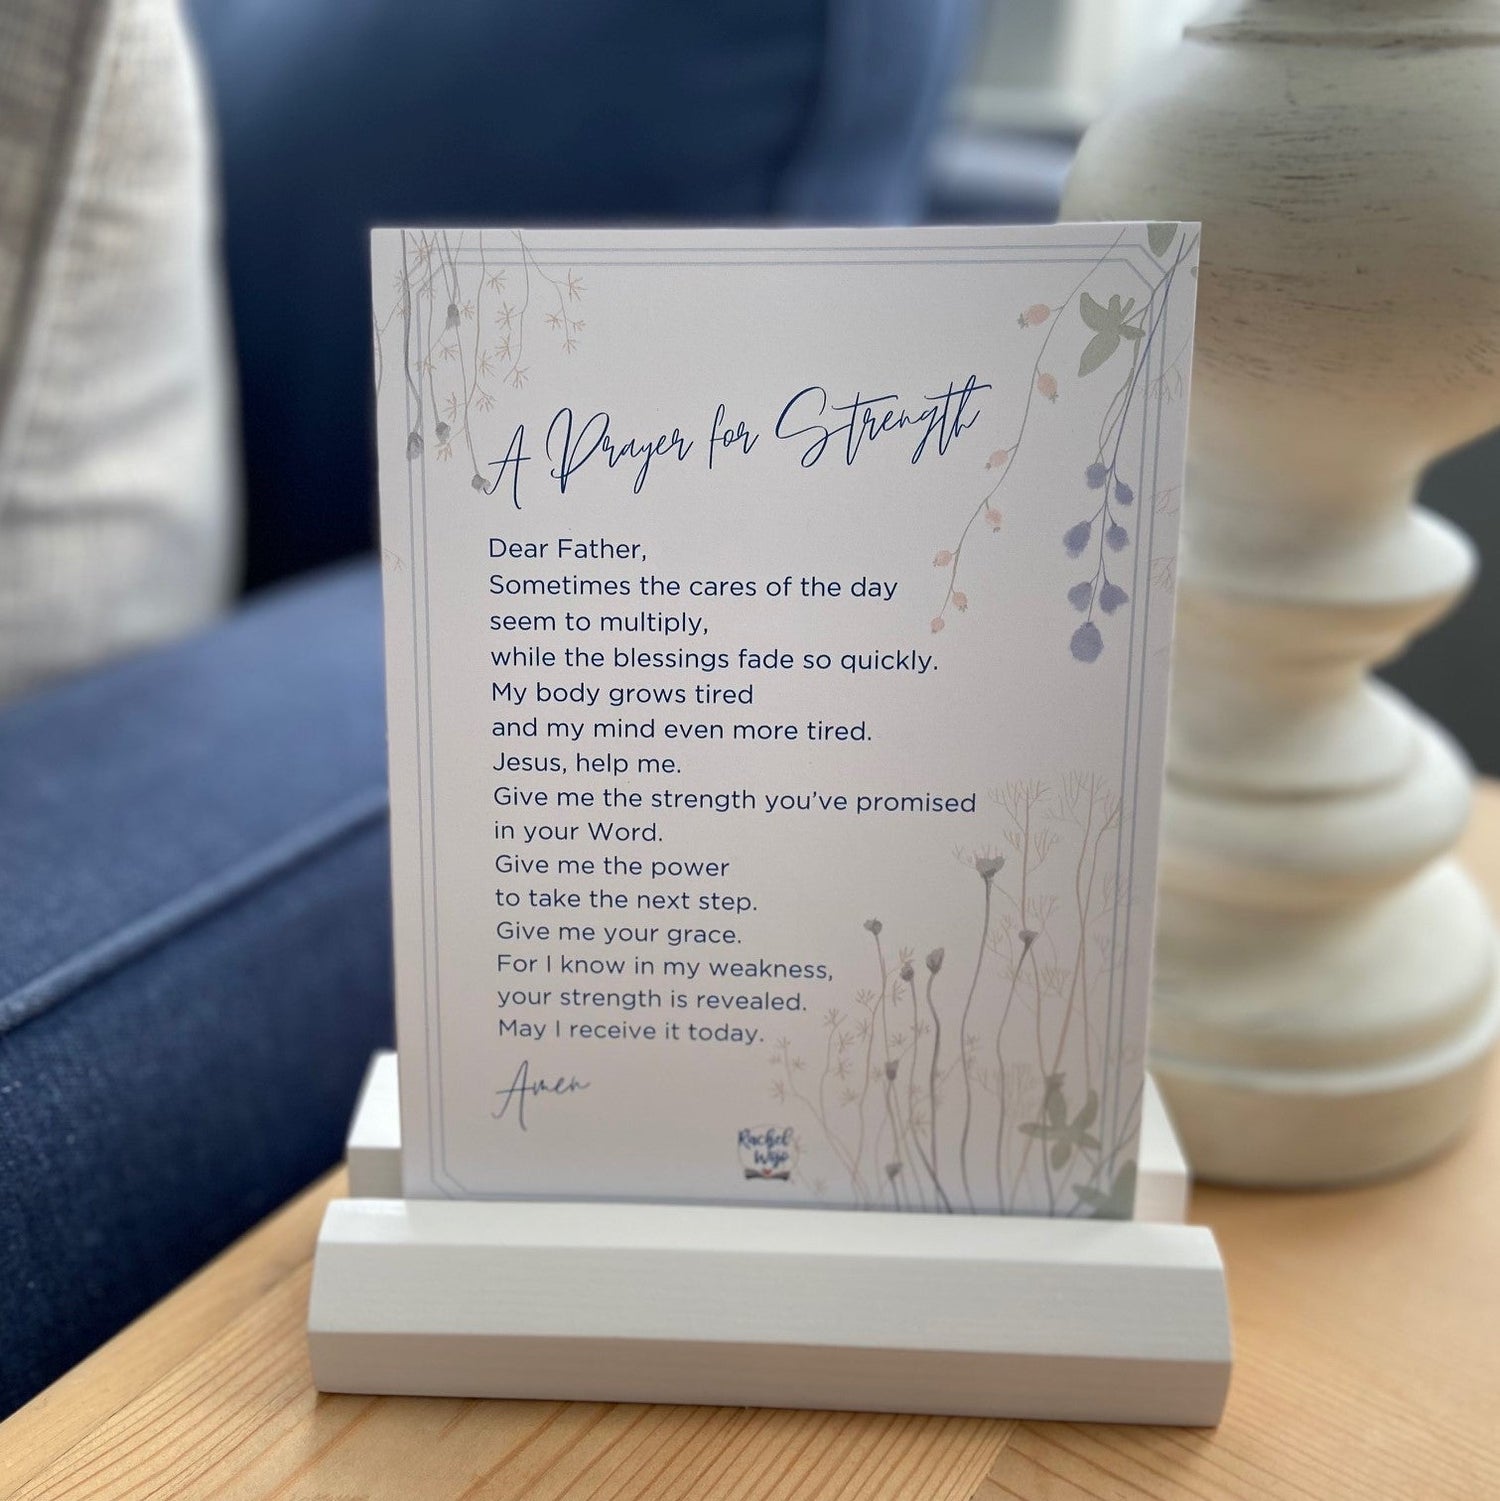 31 Days of Prayers for the Heart Prayer Cards with Display Stand - Rachel Wojo Shop